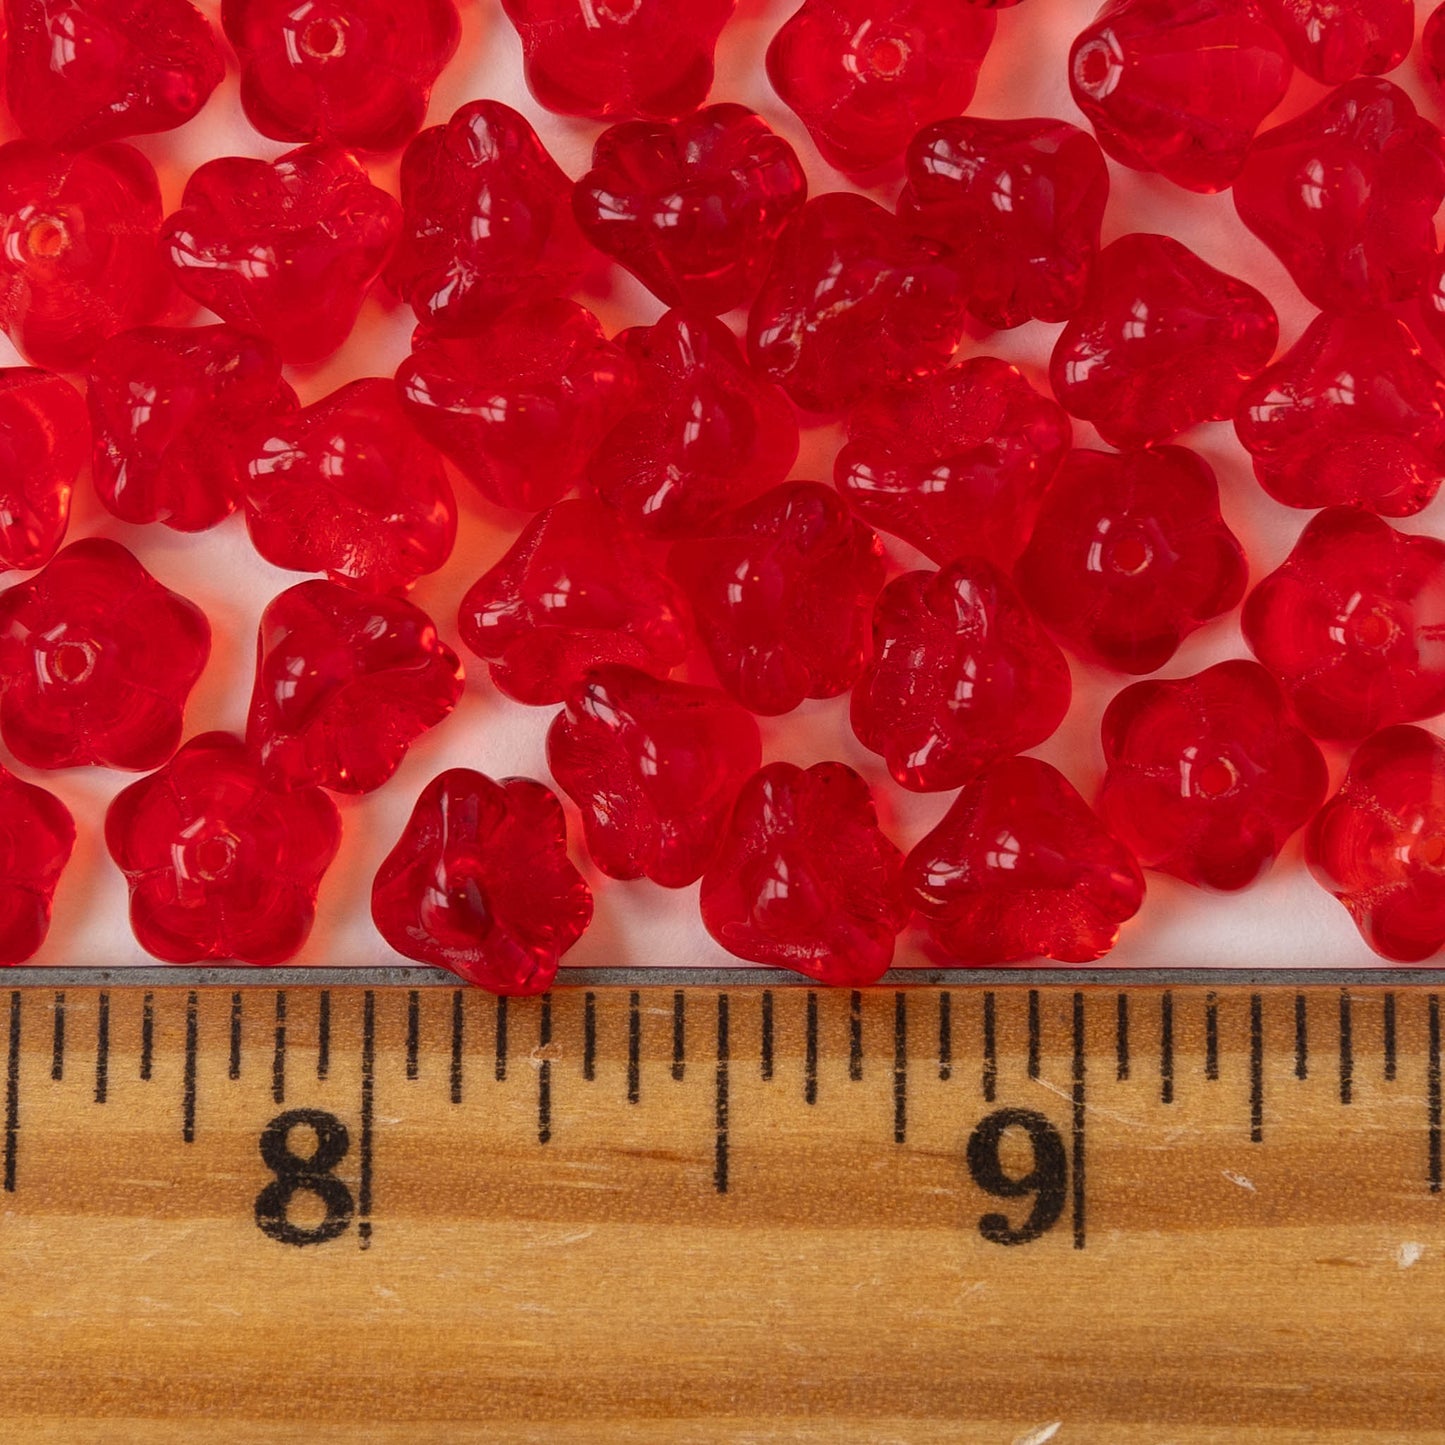 6x8mm Glass Flower Beads - Red - 30